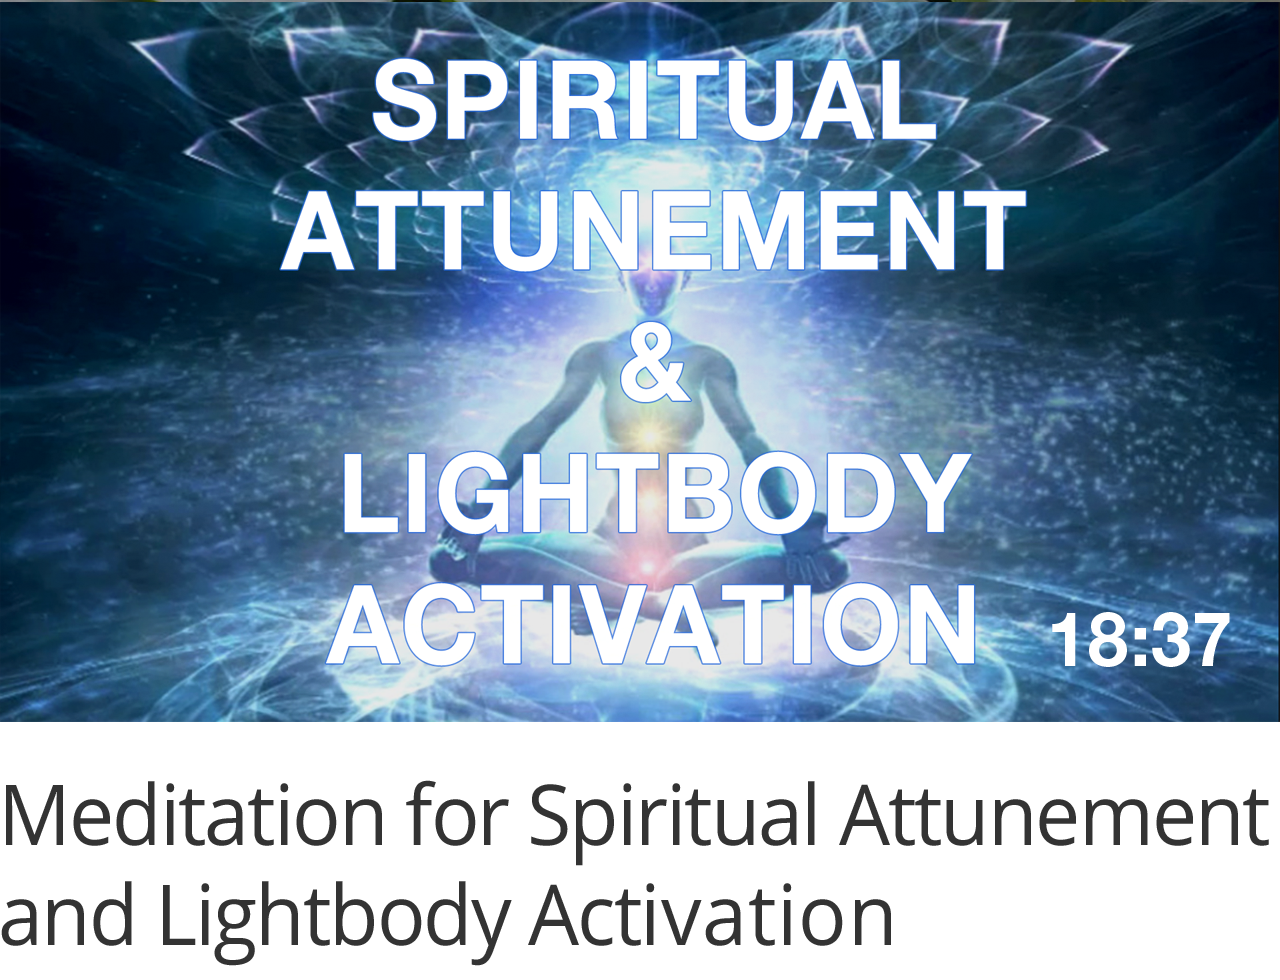 Guided Meditation for Spiritual Attunement and Lightbody Activation